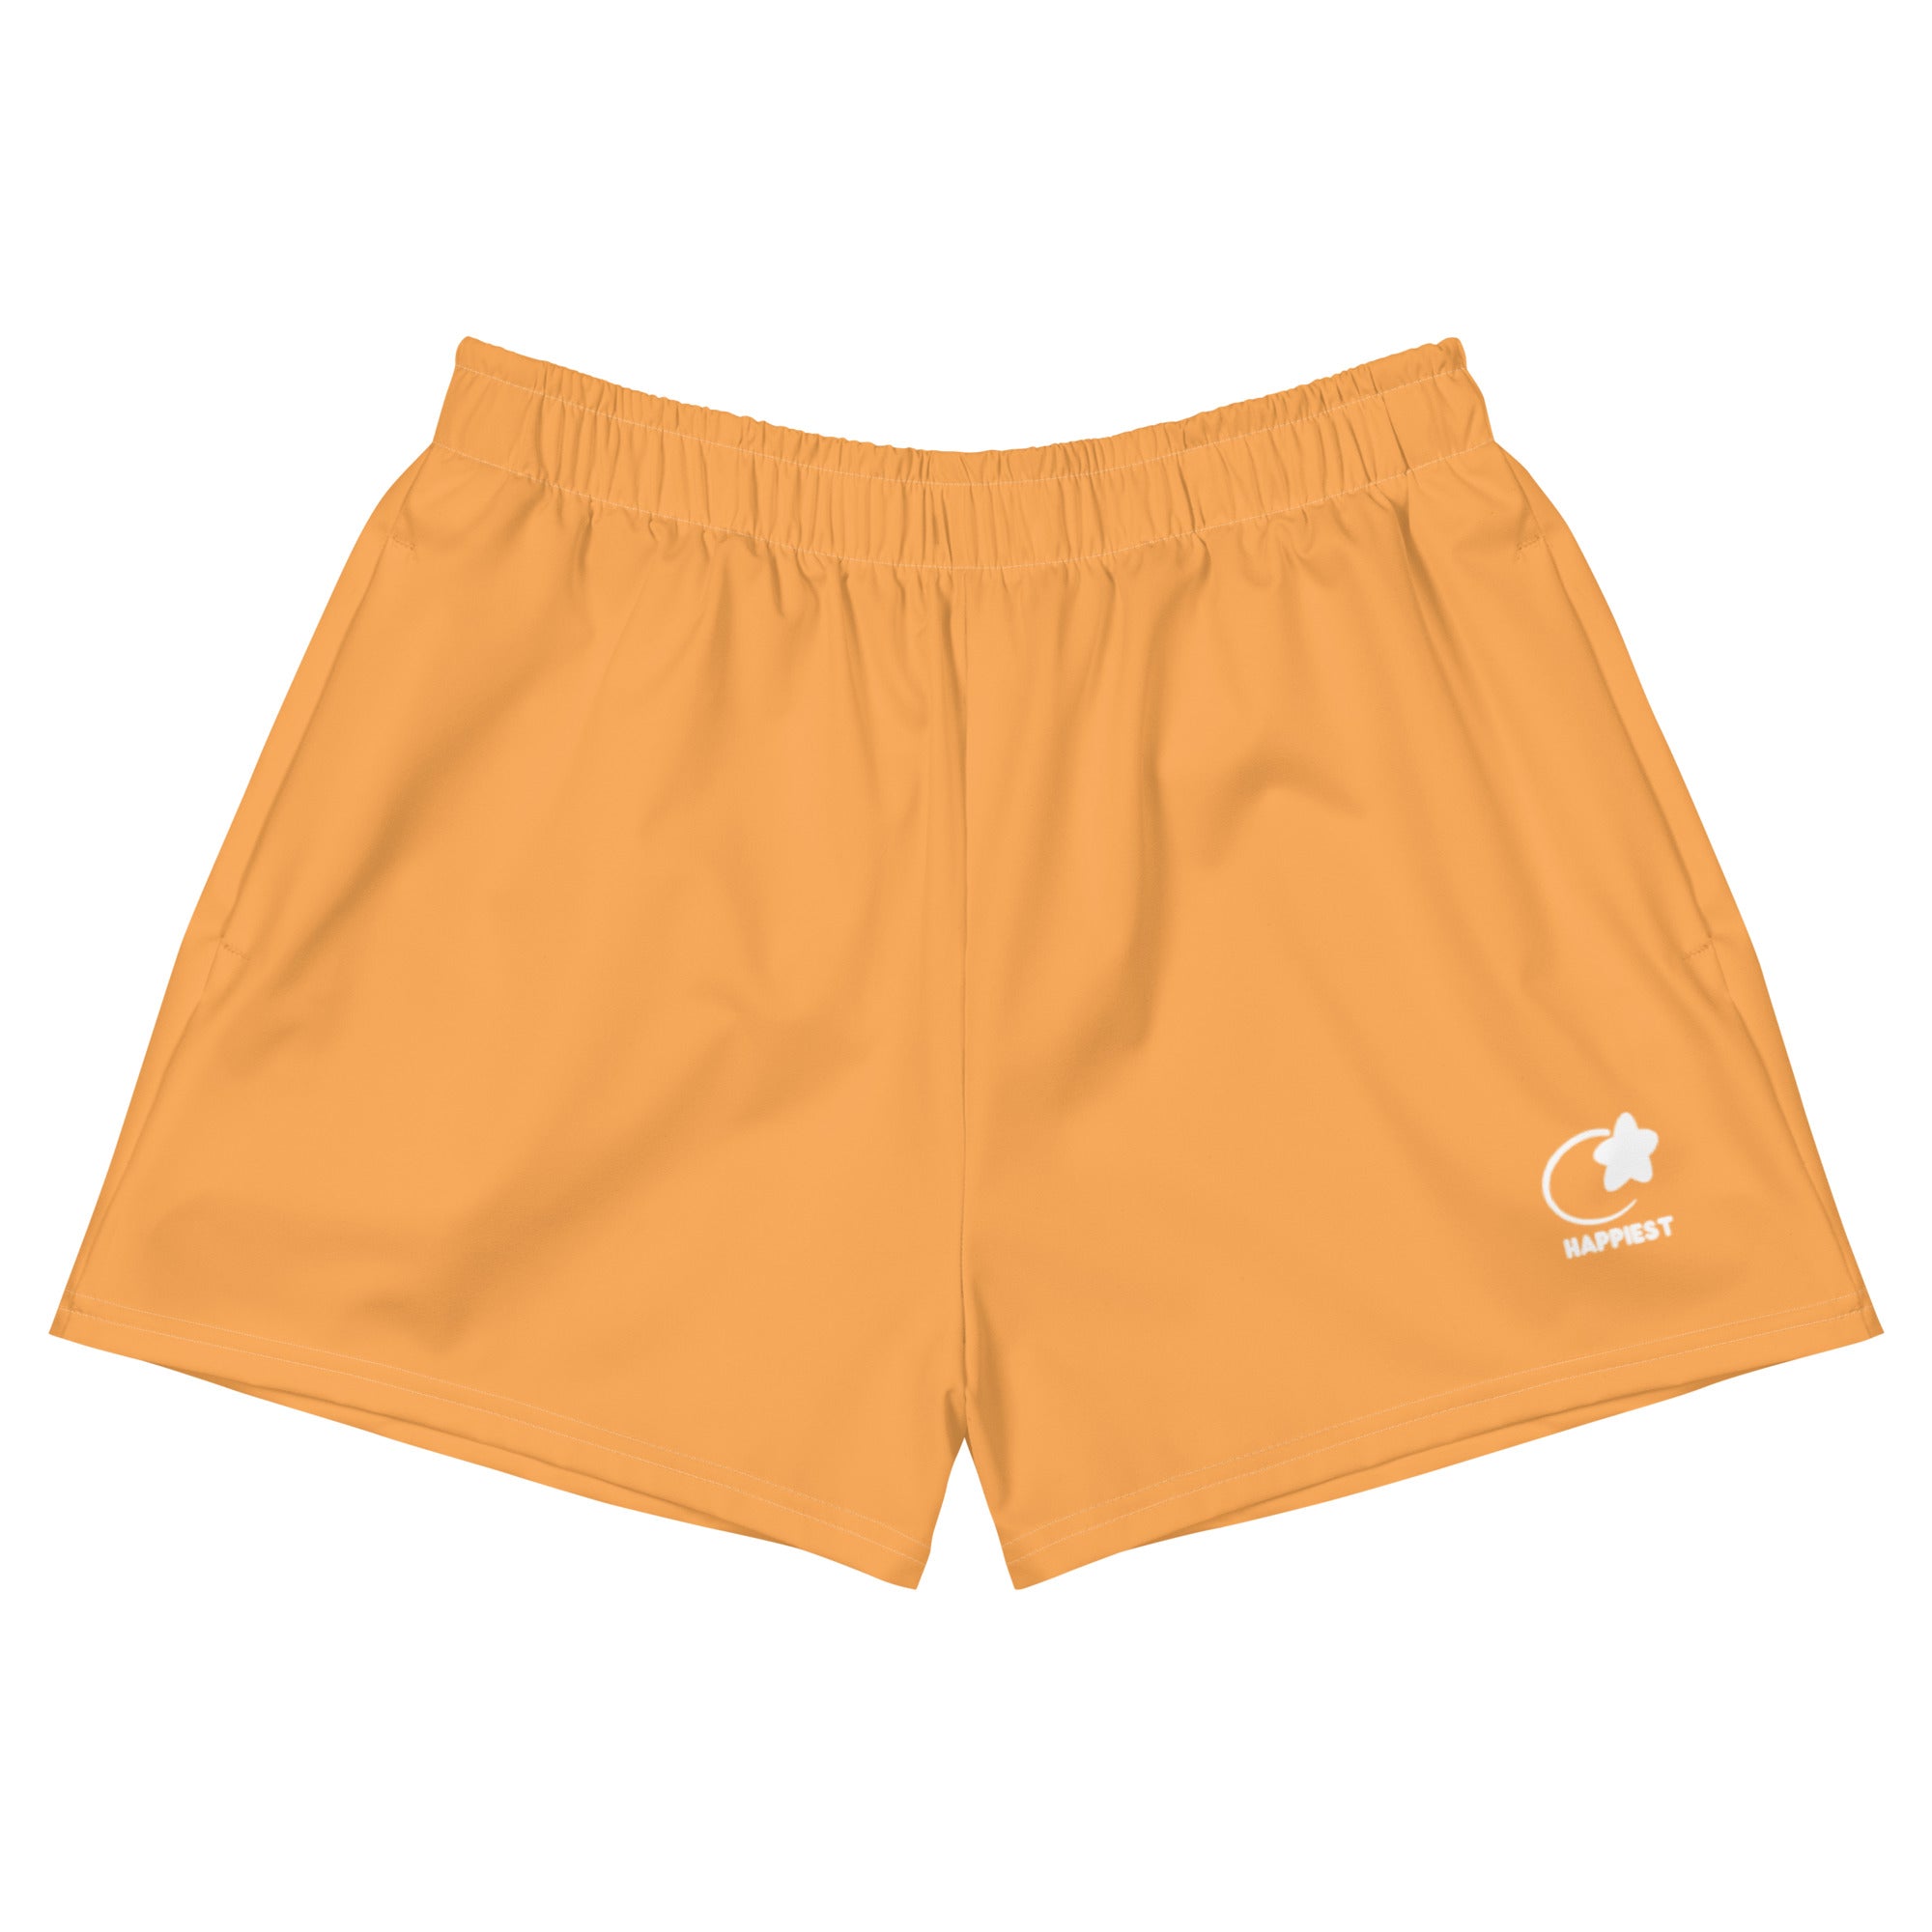 Clementine Women’s Recycled Athletic Shorts